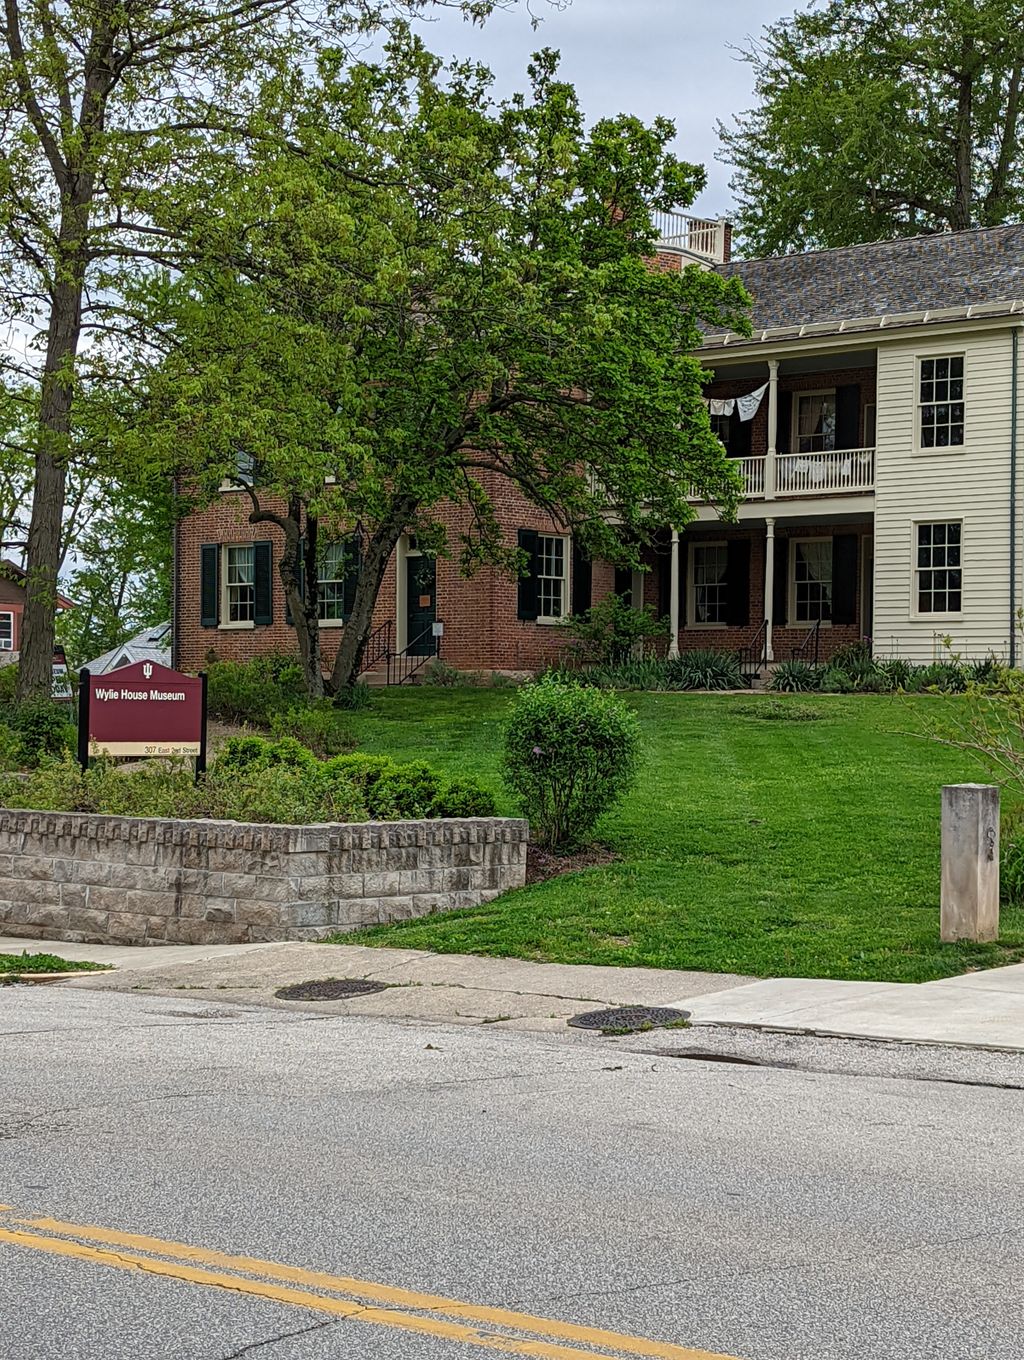 Wylie House Museum